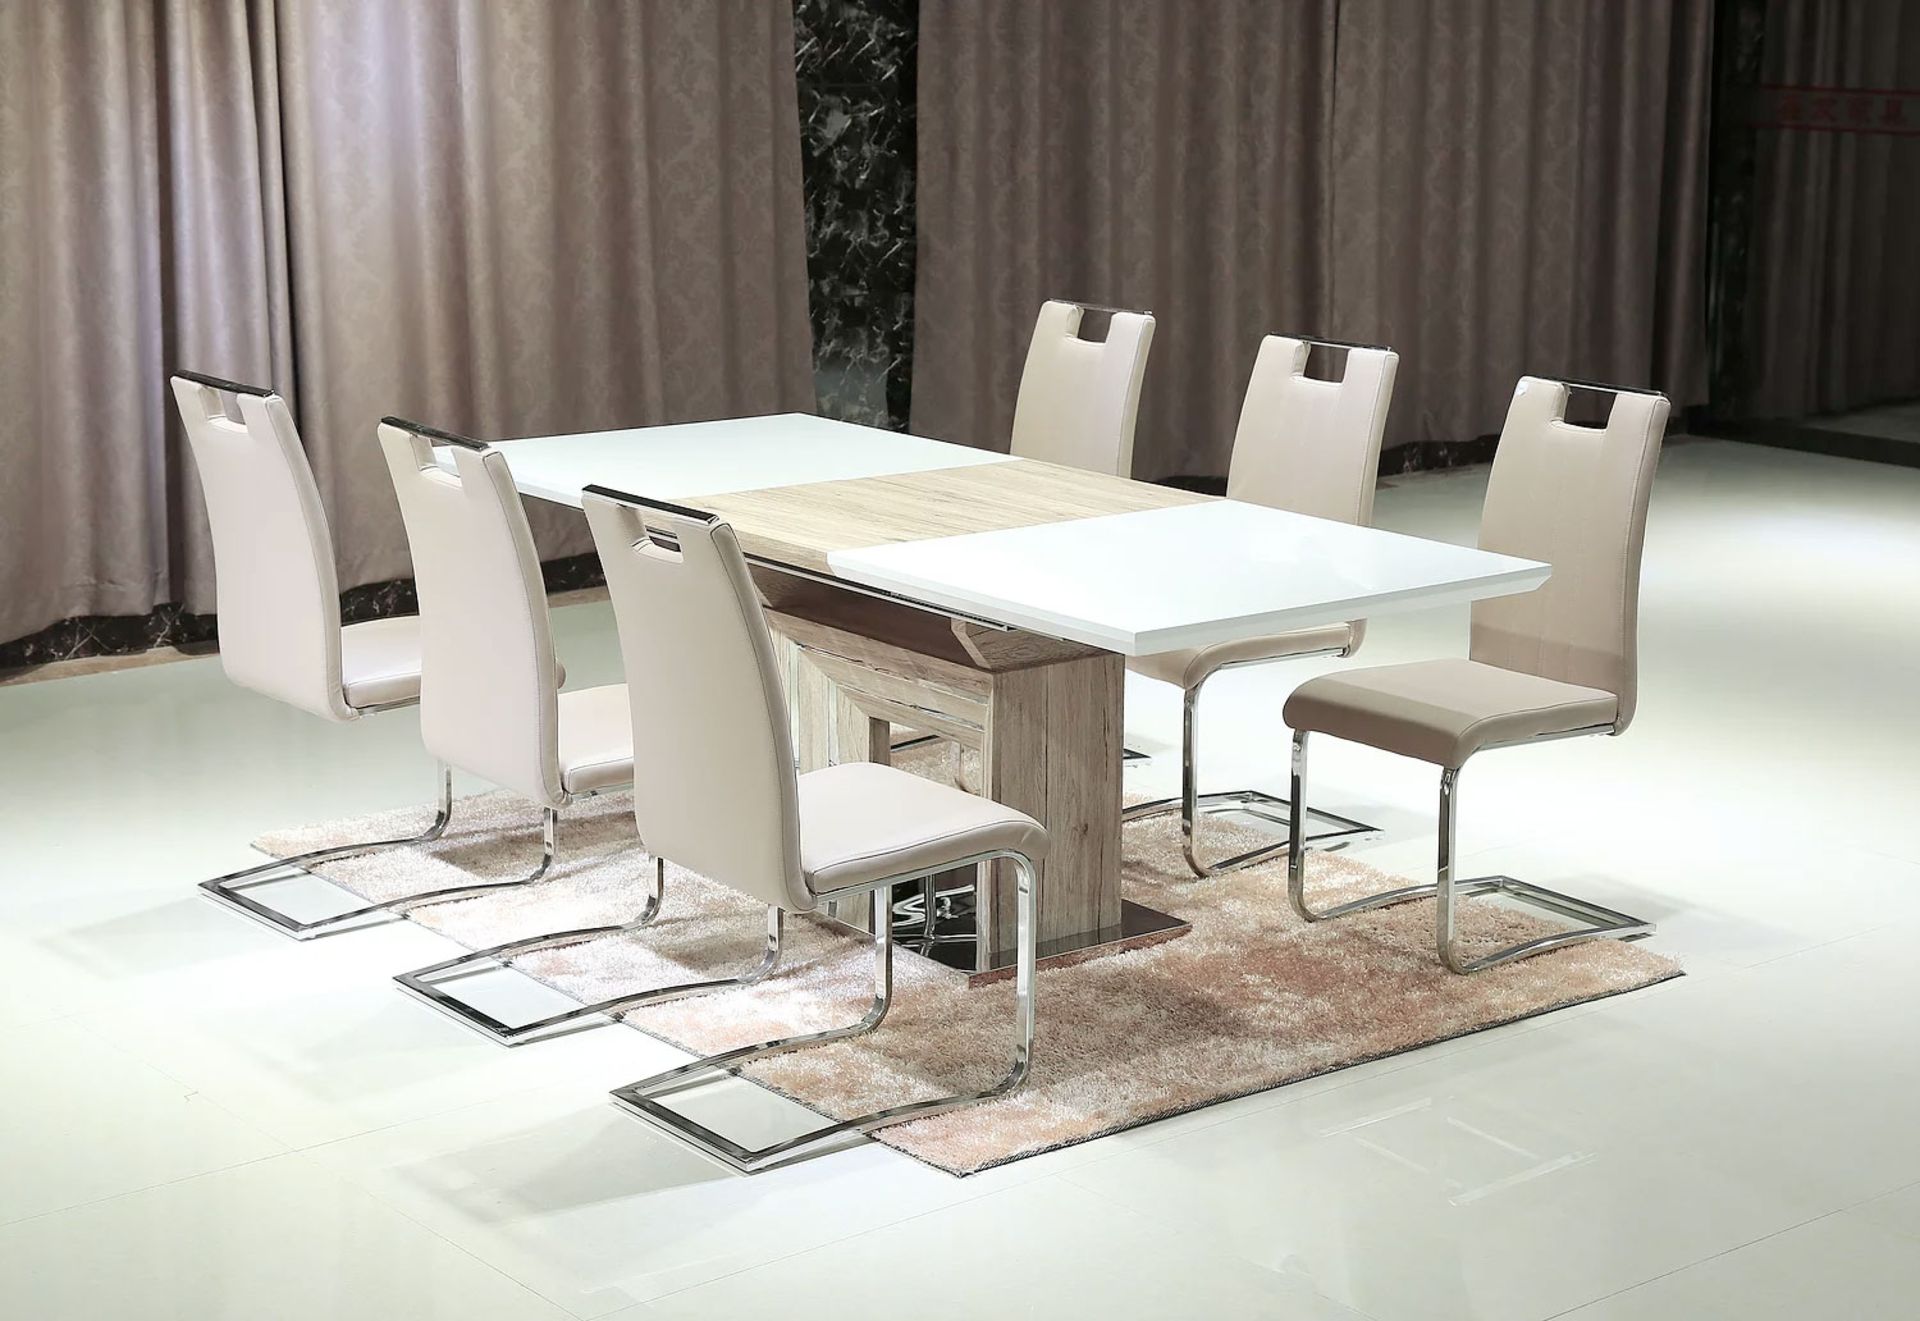 UNITS - WHITE HIGH GLOSS 4 / 6 PERSON EXTENDABLE DINING TABLE W/ WOOD LIKE ACCENTS (LK-GRACE) (NEW